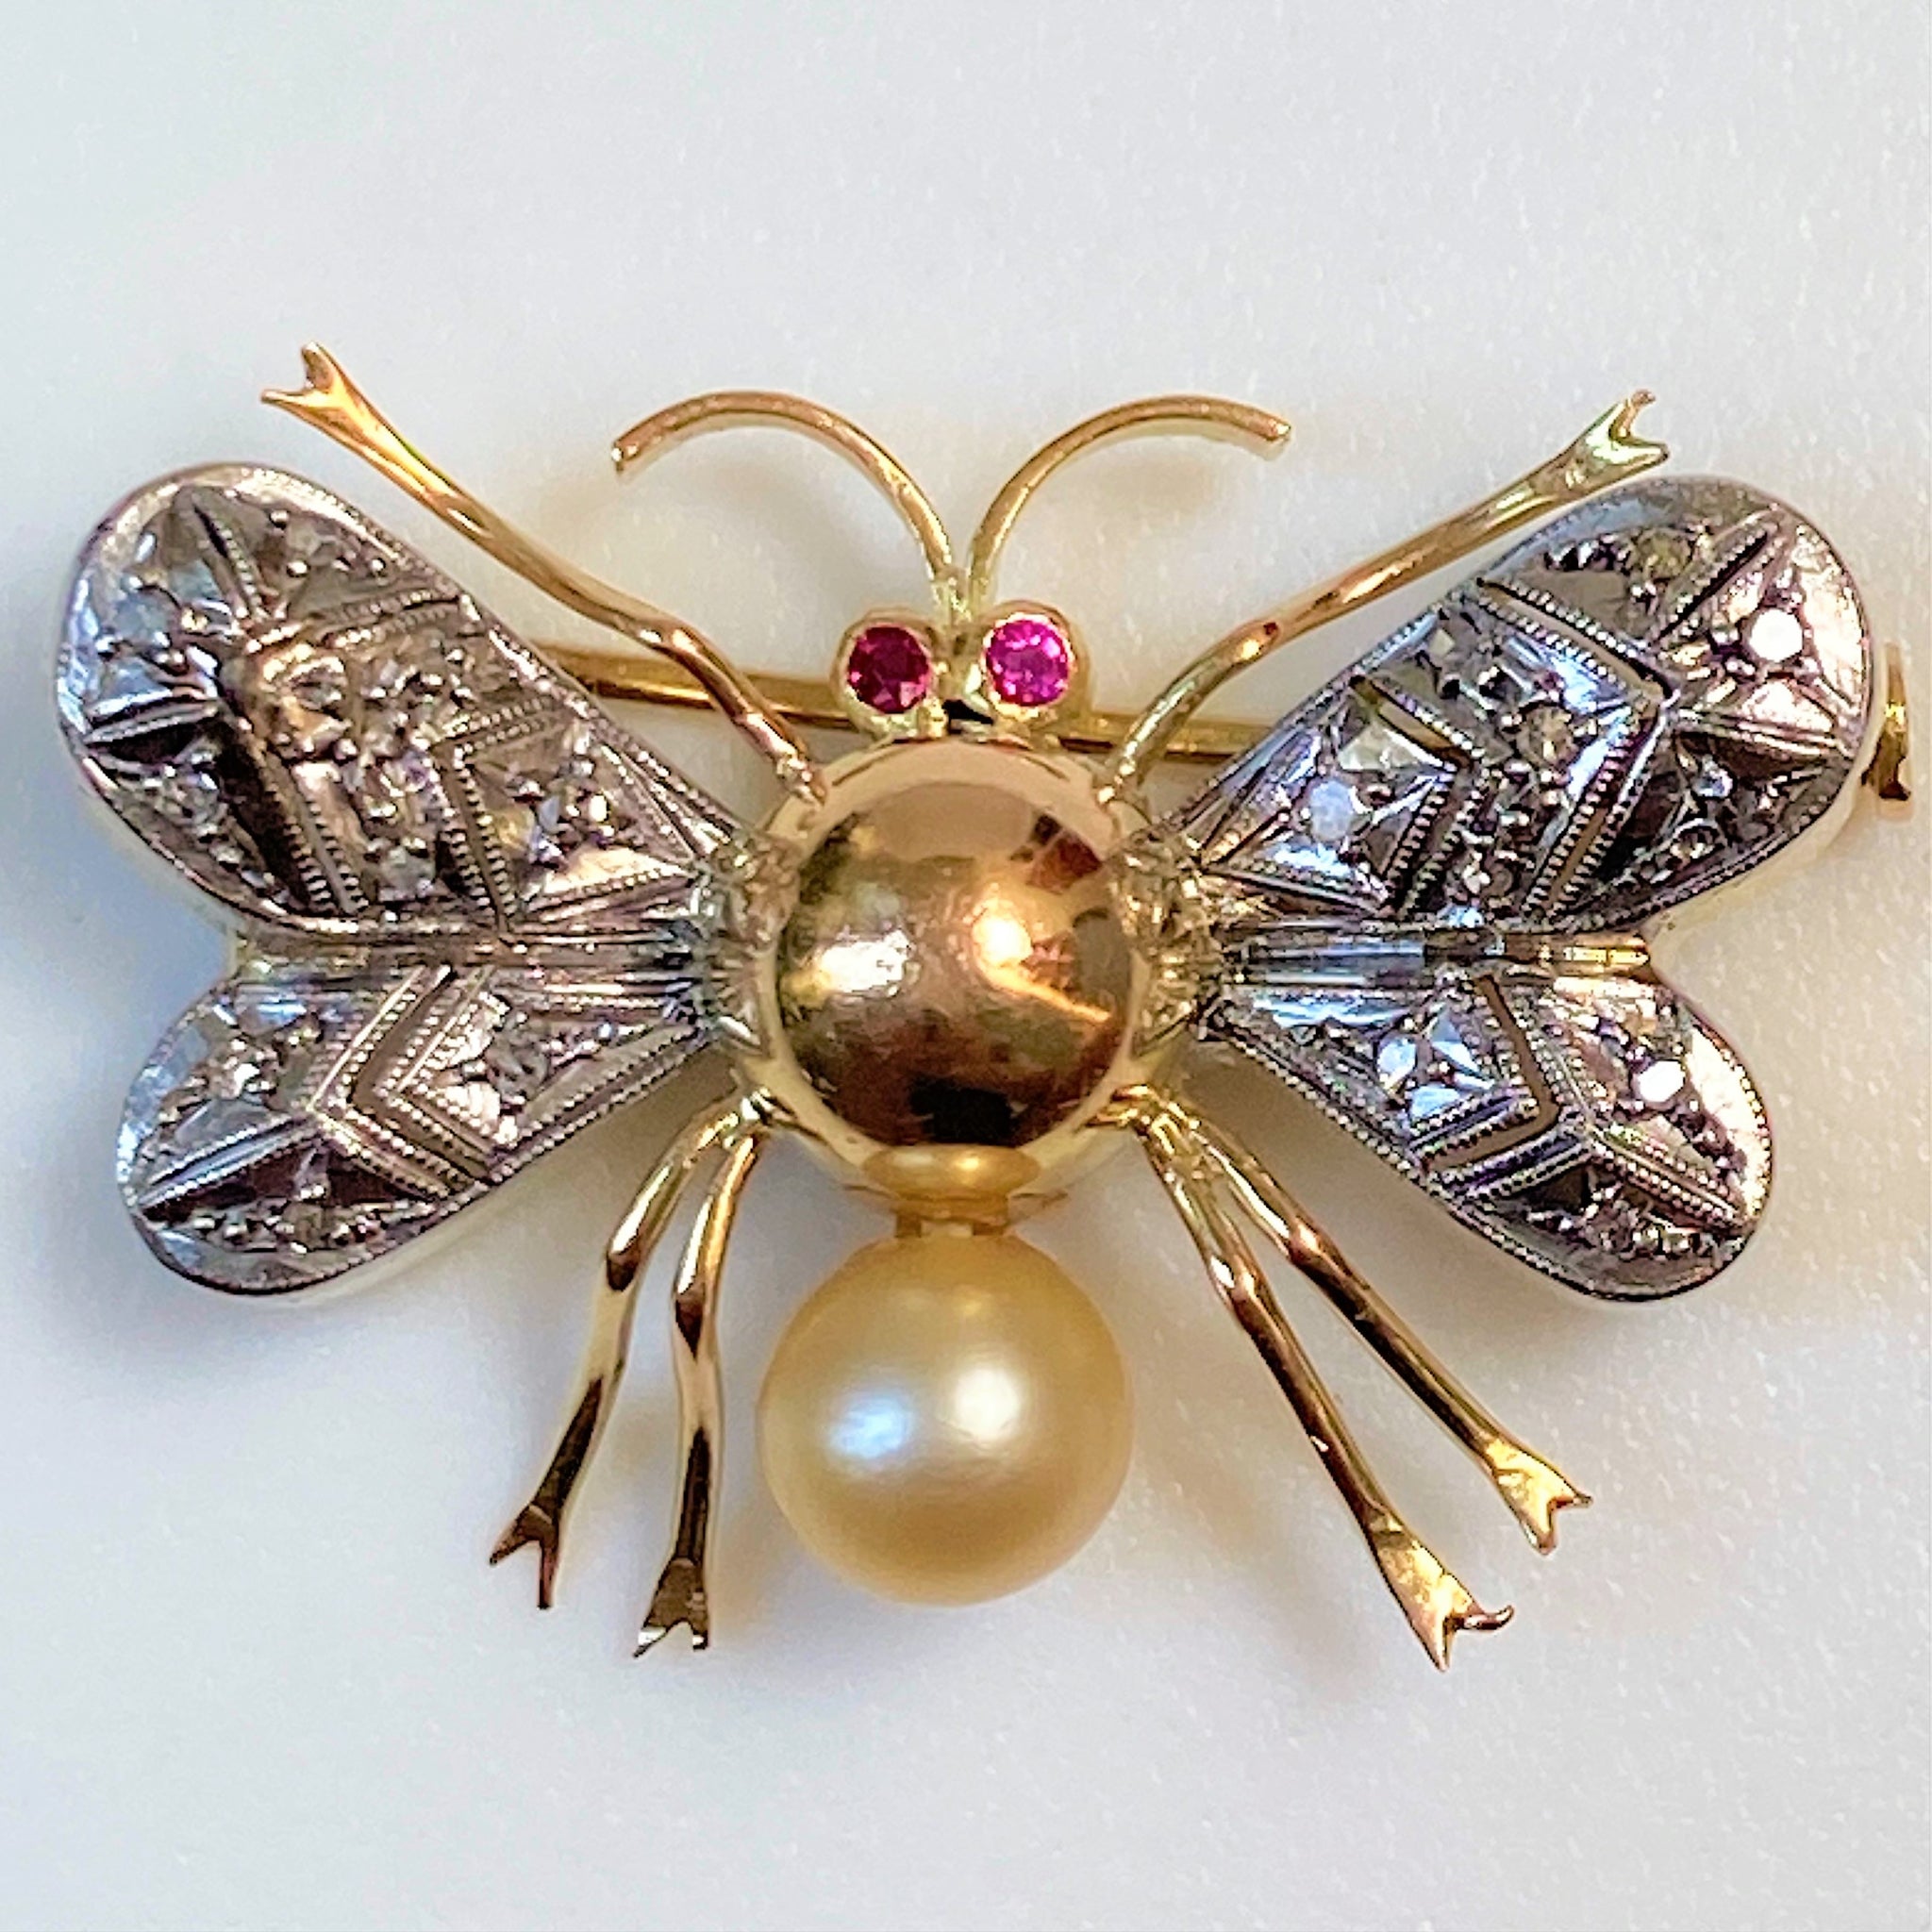 Gold and Palladium, Diamond, Pearl and Ruby “Insect” Brooch